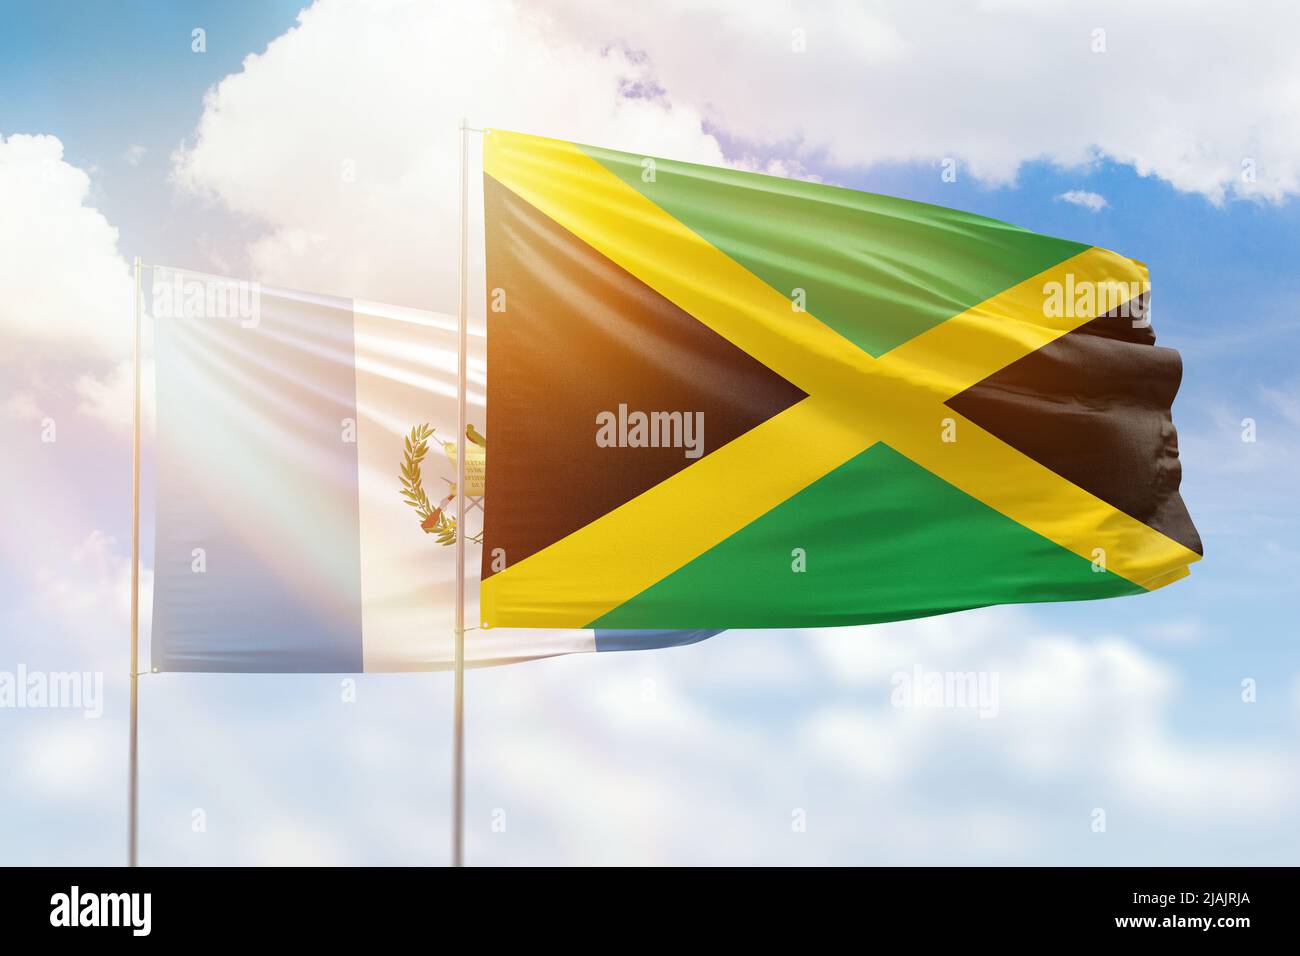 Sunny blue sky and flags of jamaica and guatemala Stock Photo